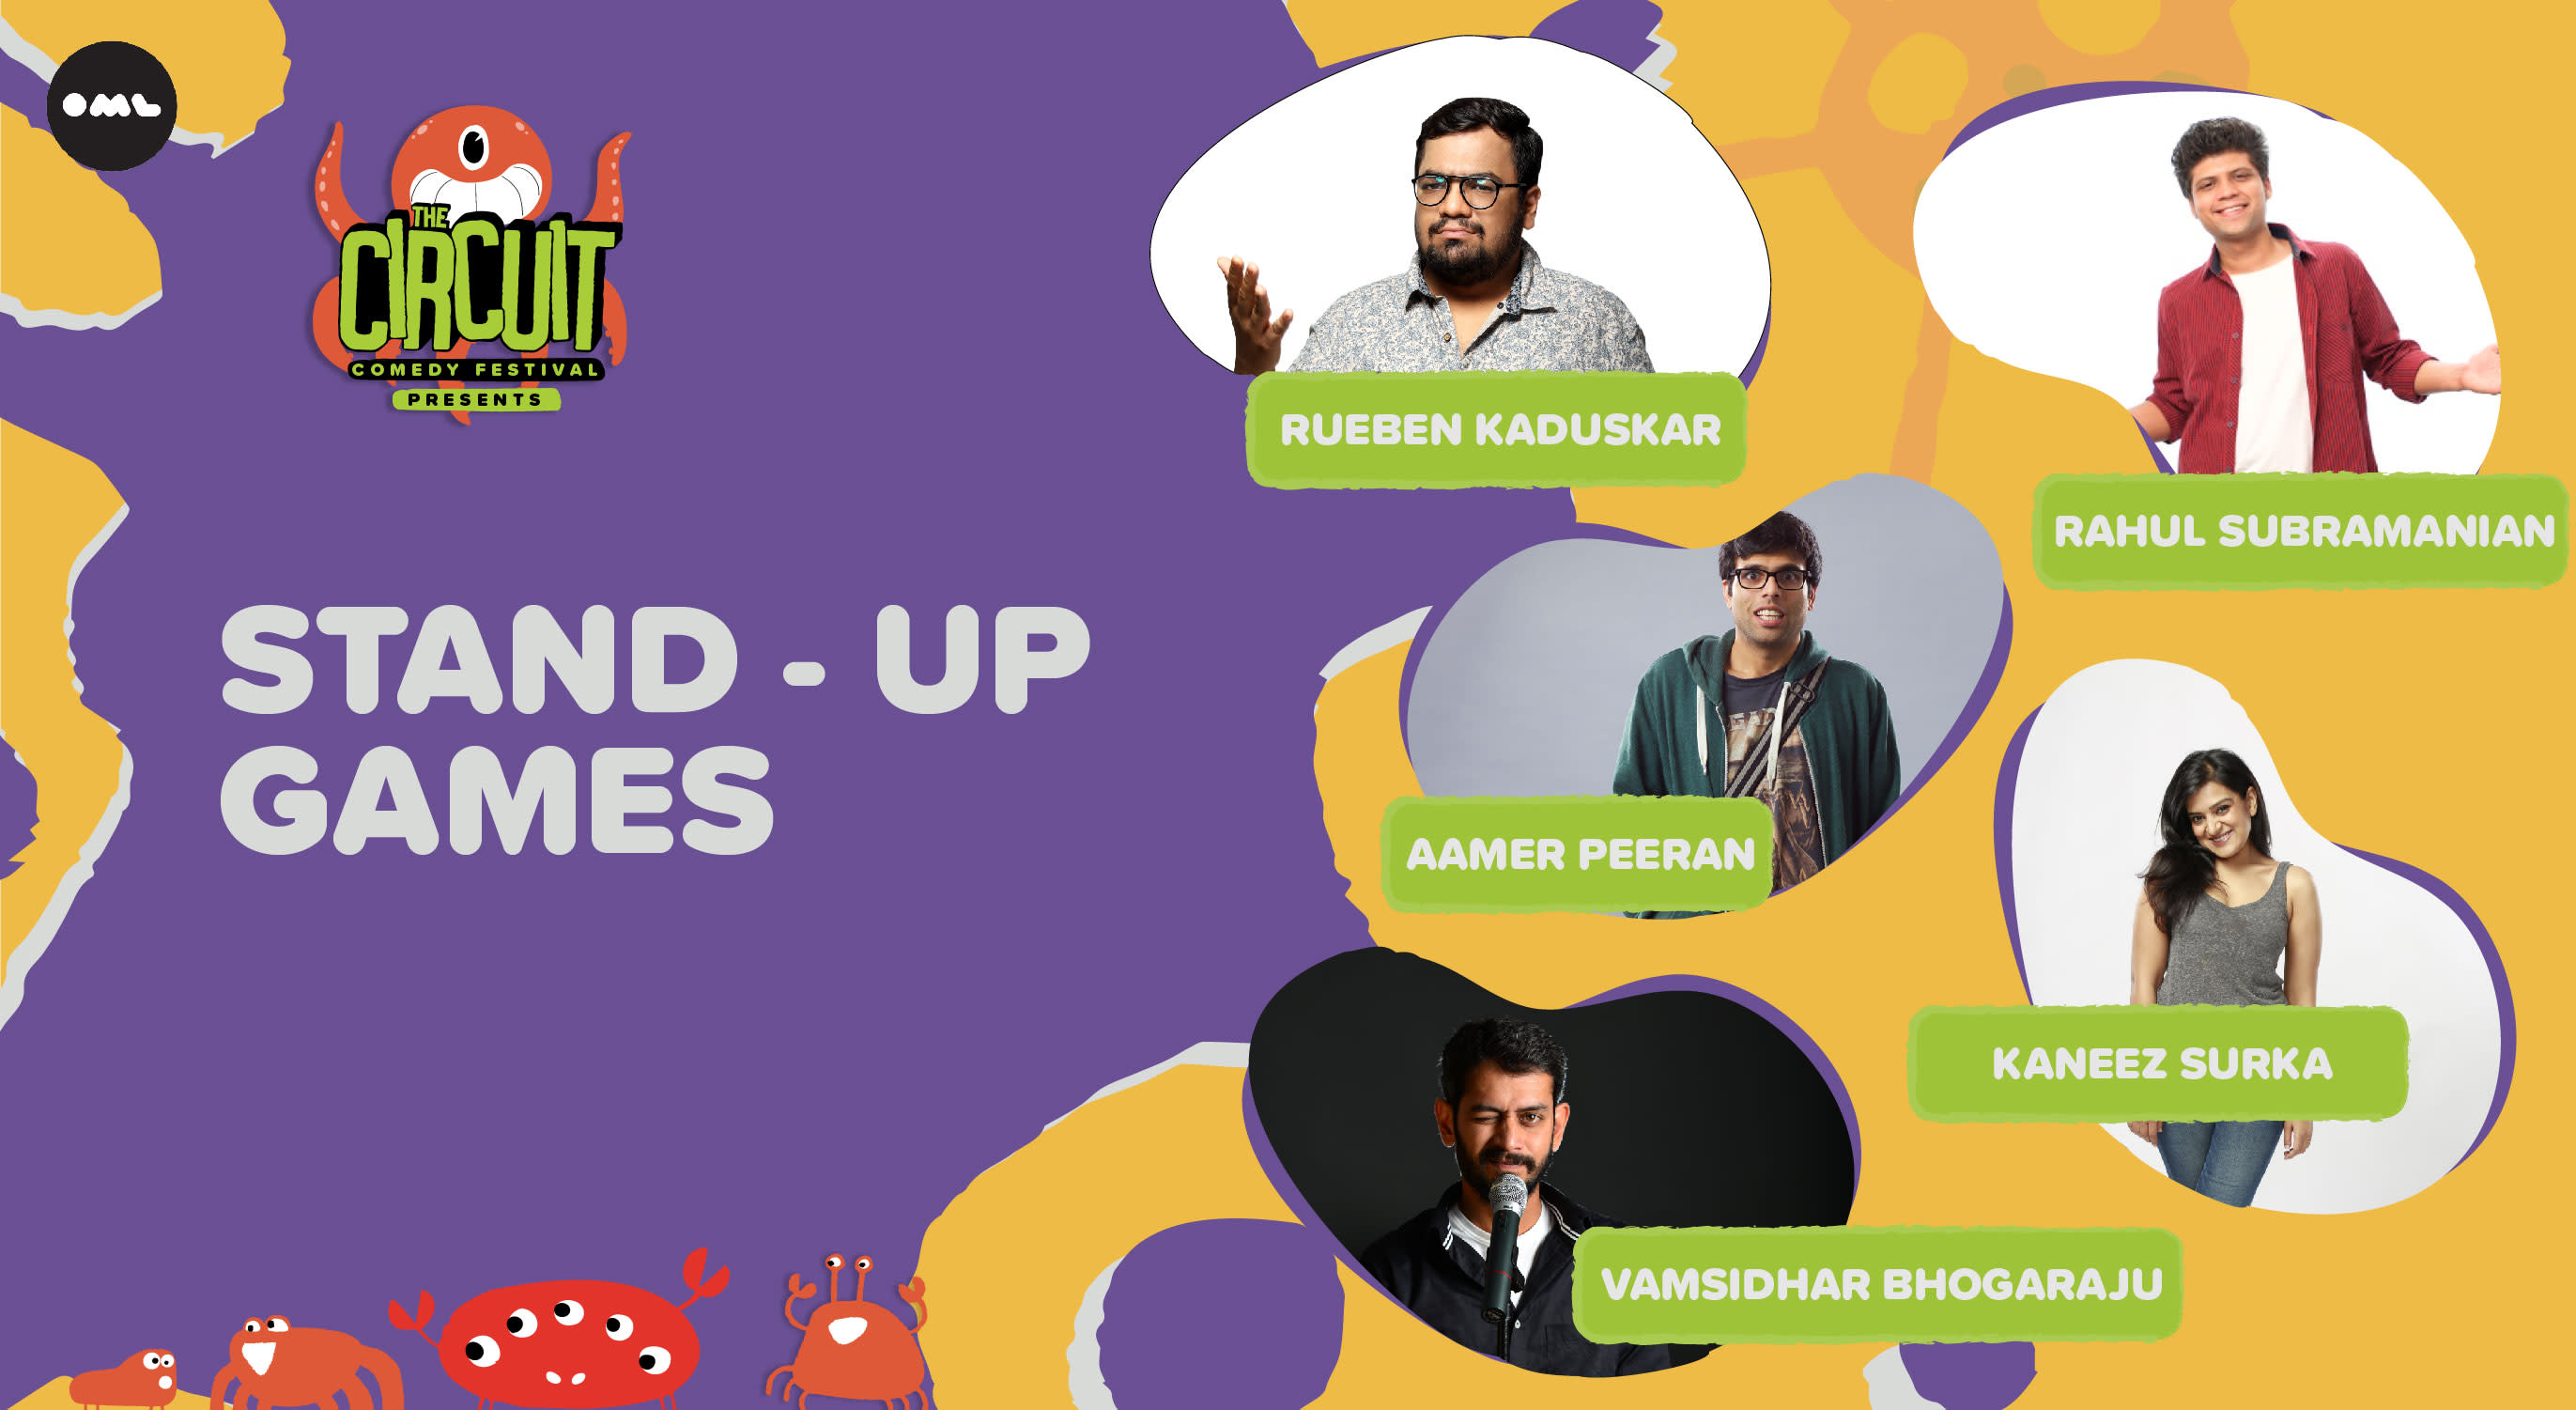 Stand-up Games | The Circuit Comedy Festival, Bengaluru